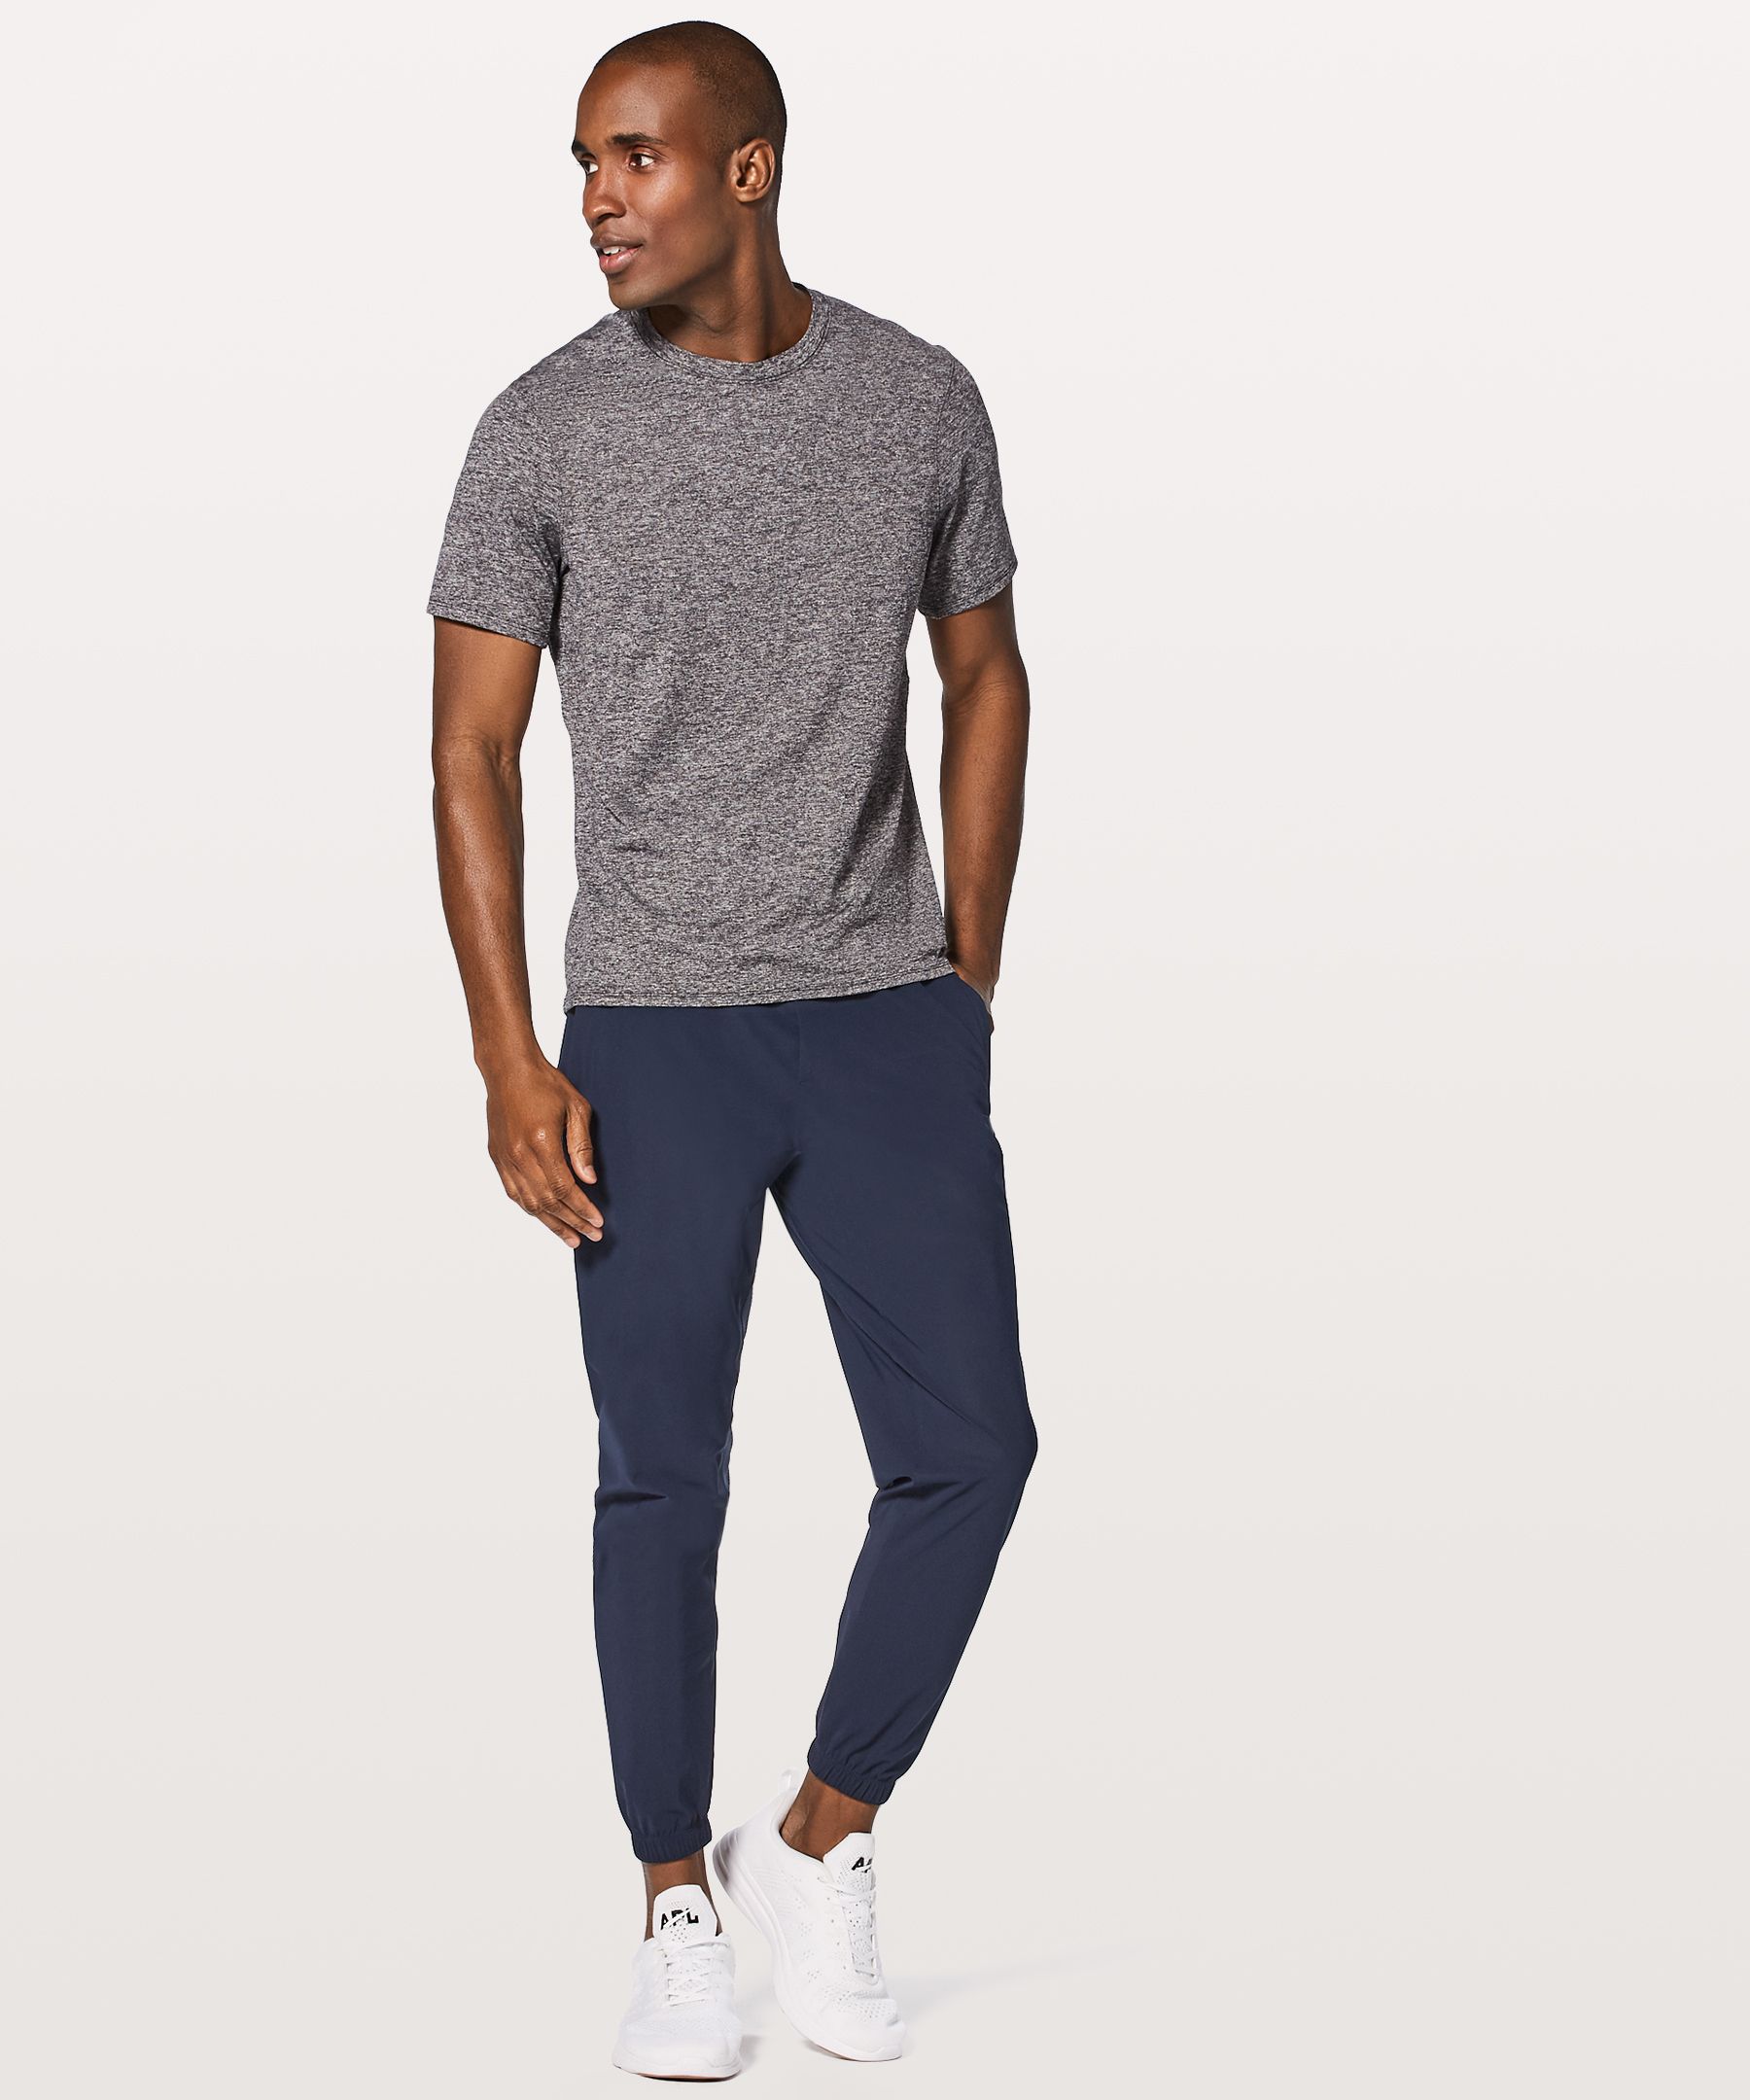 These Popular  Joggers Are a Lululemon Dupe for $29